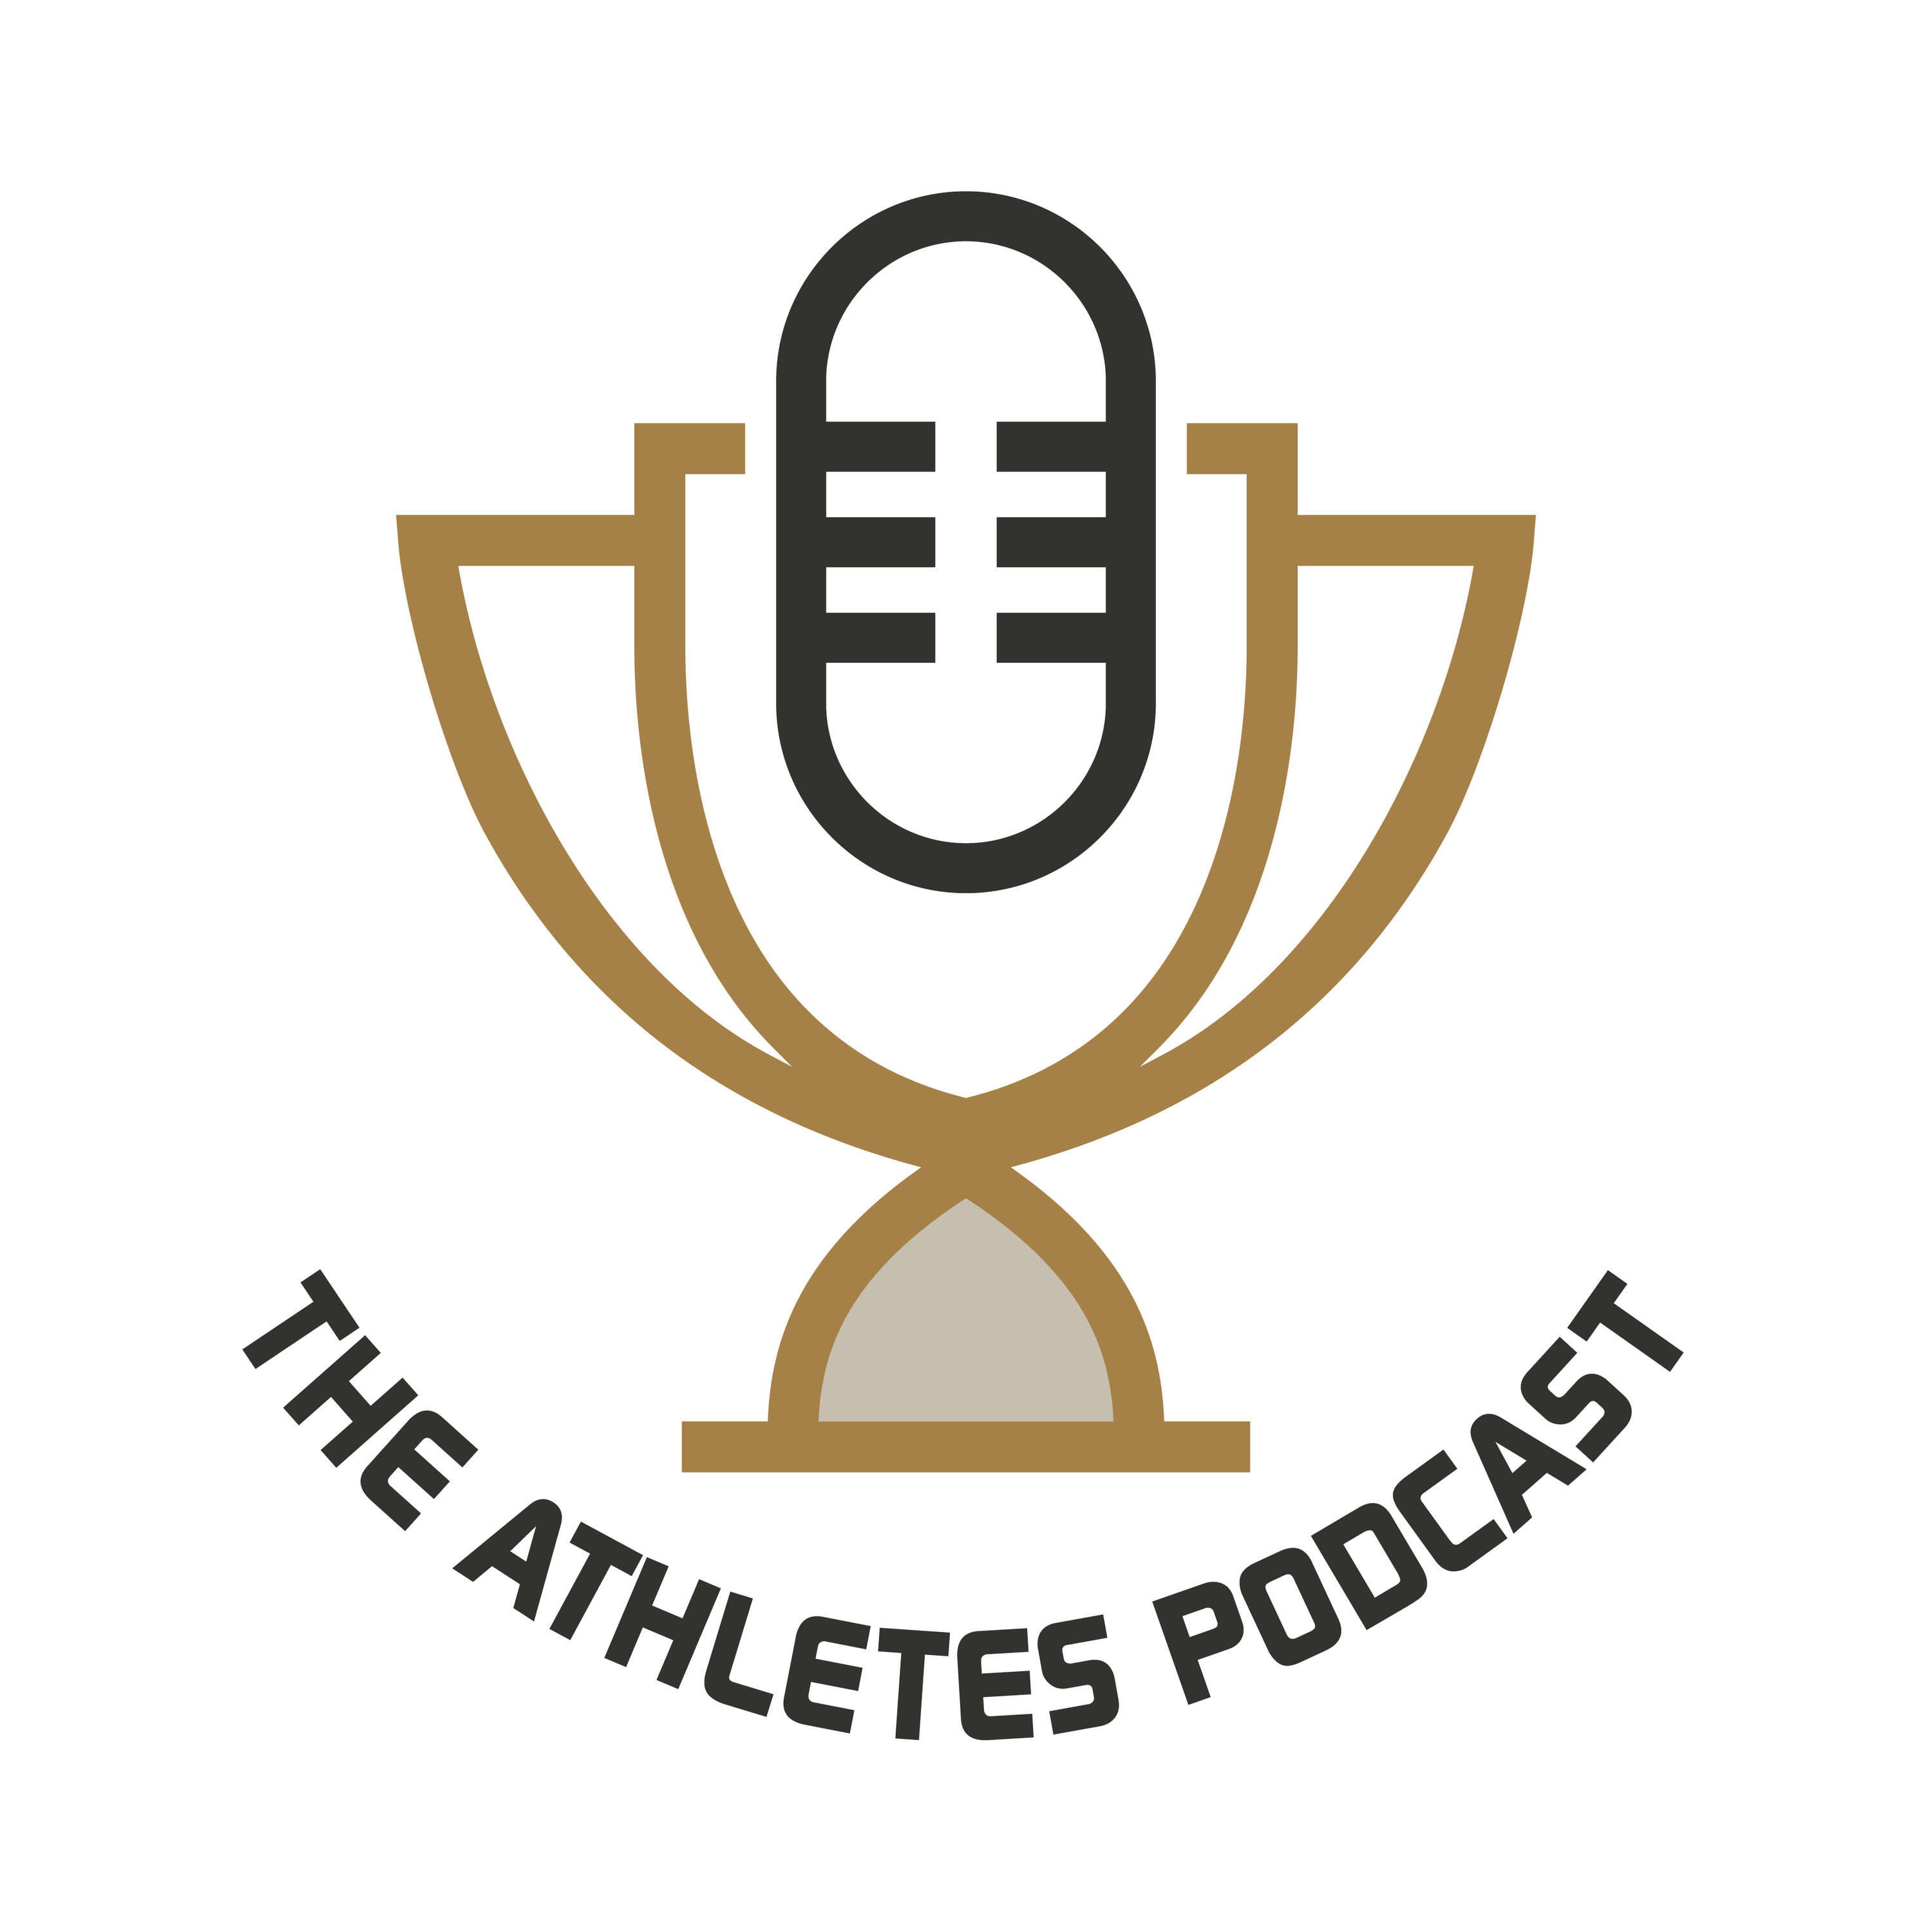 Fresh update on "scientist" discussed on The Athletes Podcast 